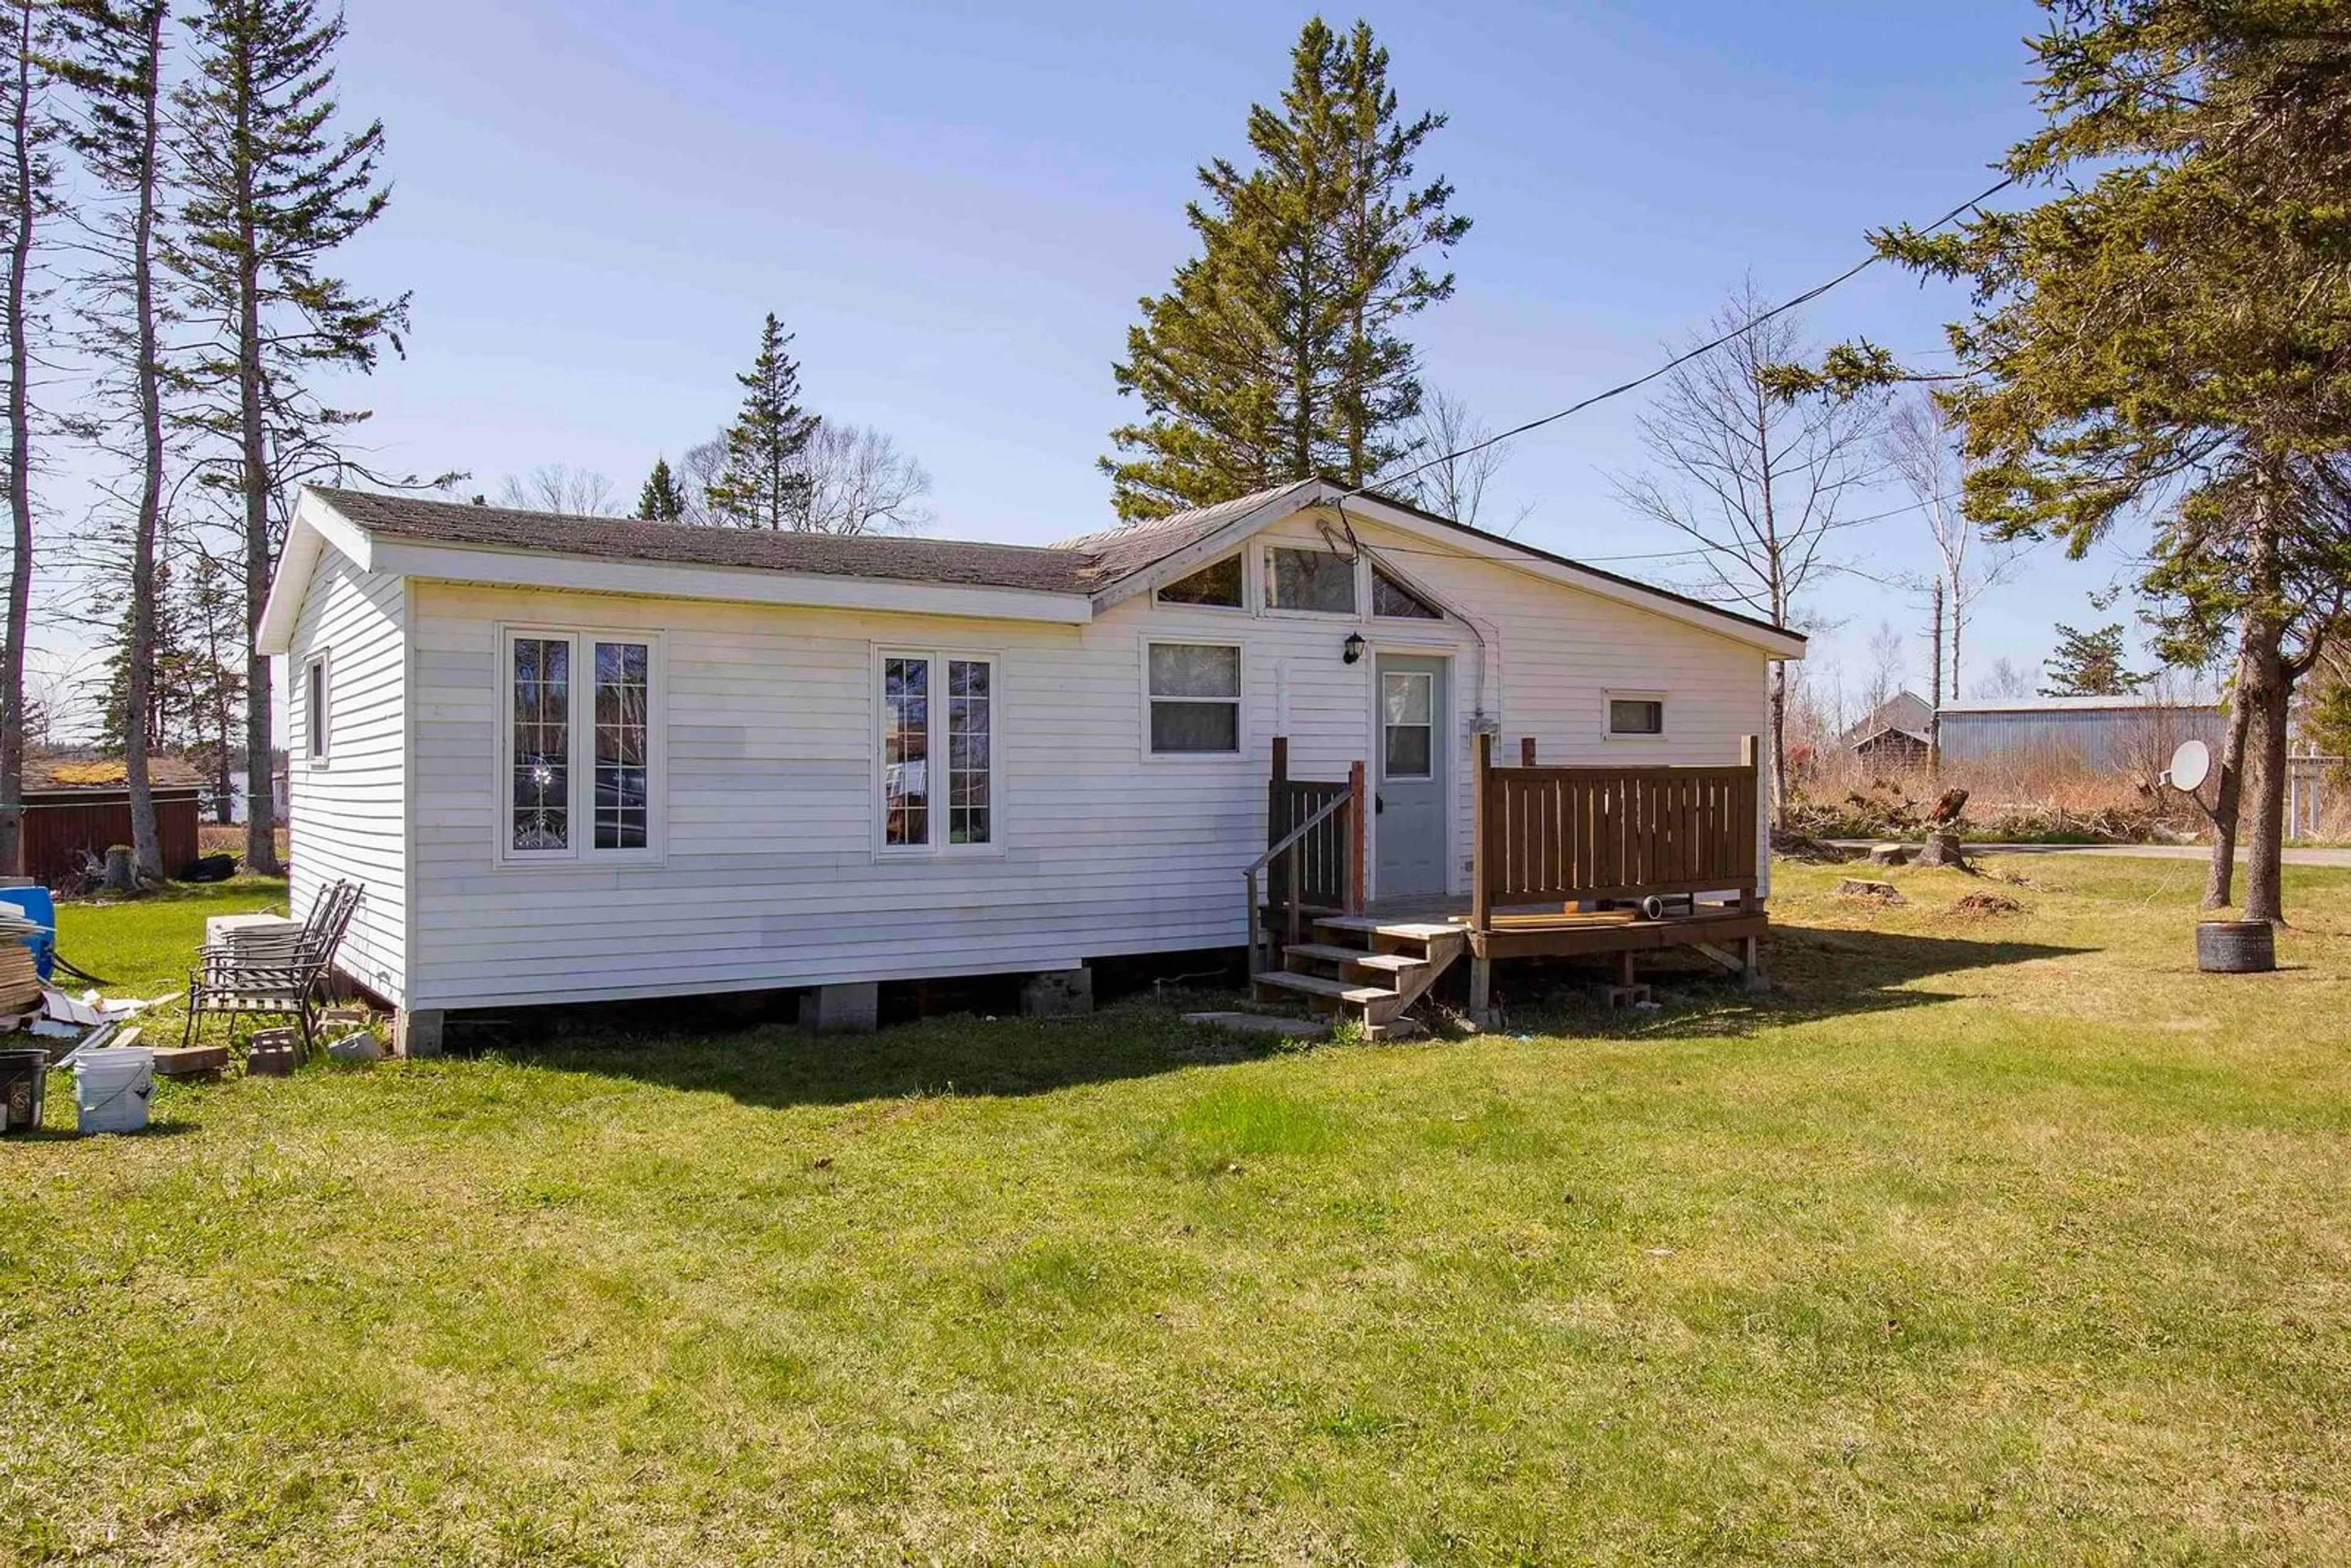 Home with unknown exterior material for 53 Jackson Point Road, Tidnish Bridge Nova Scotia B4H 3X9